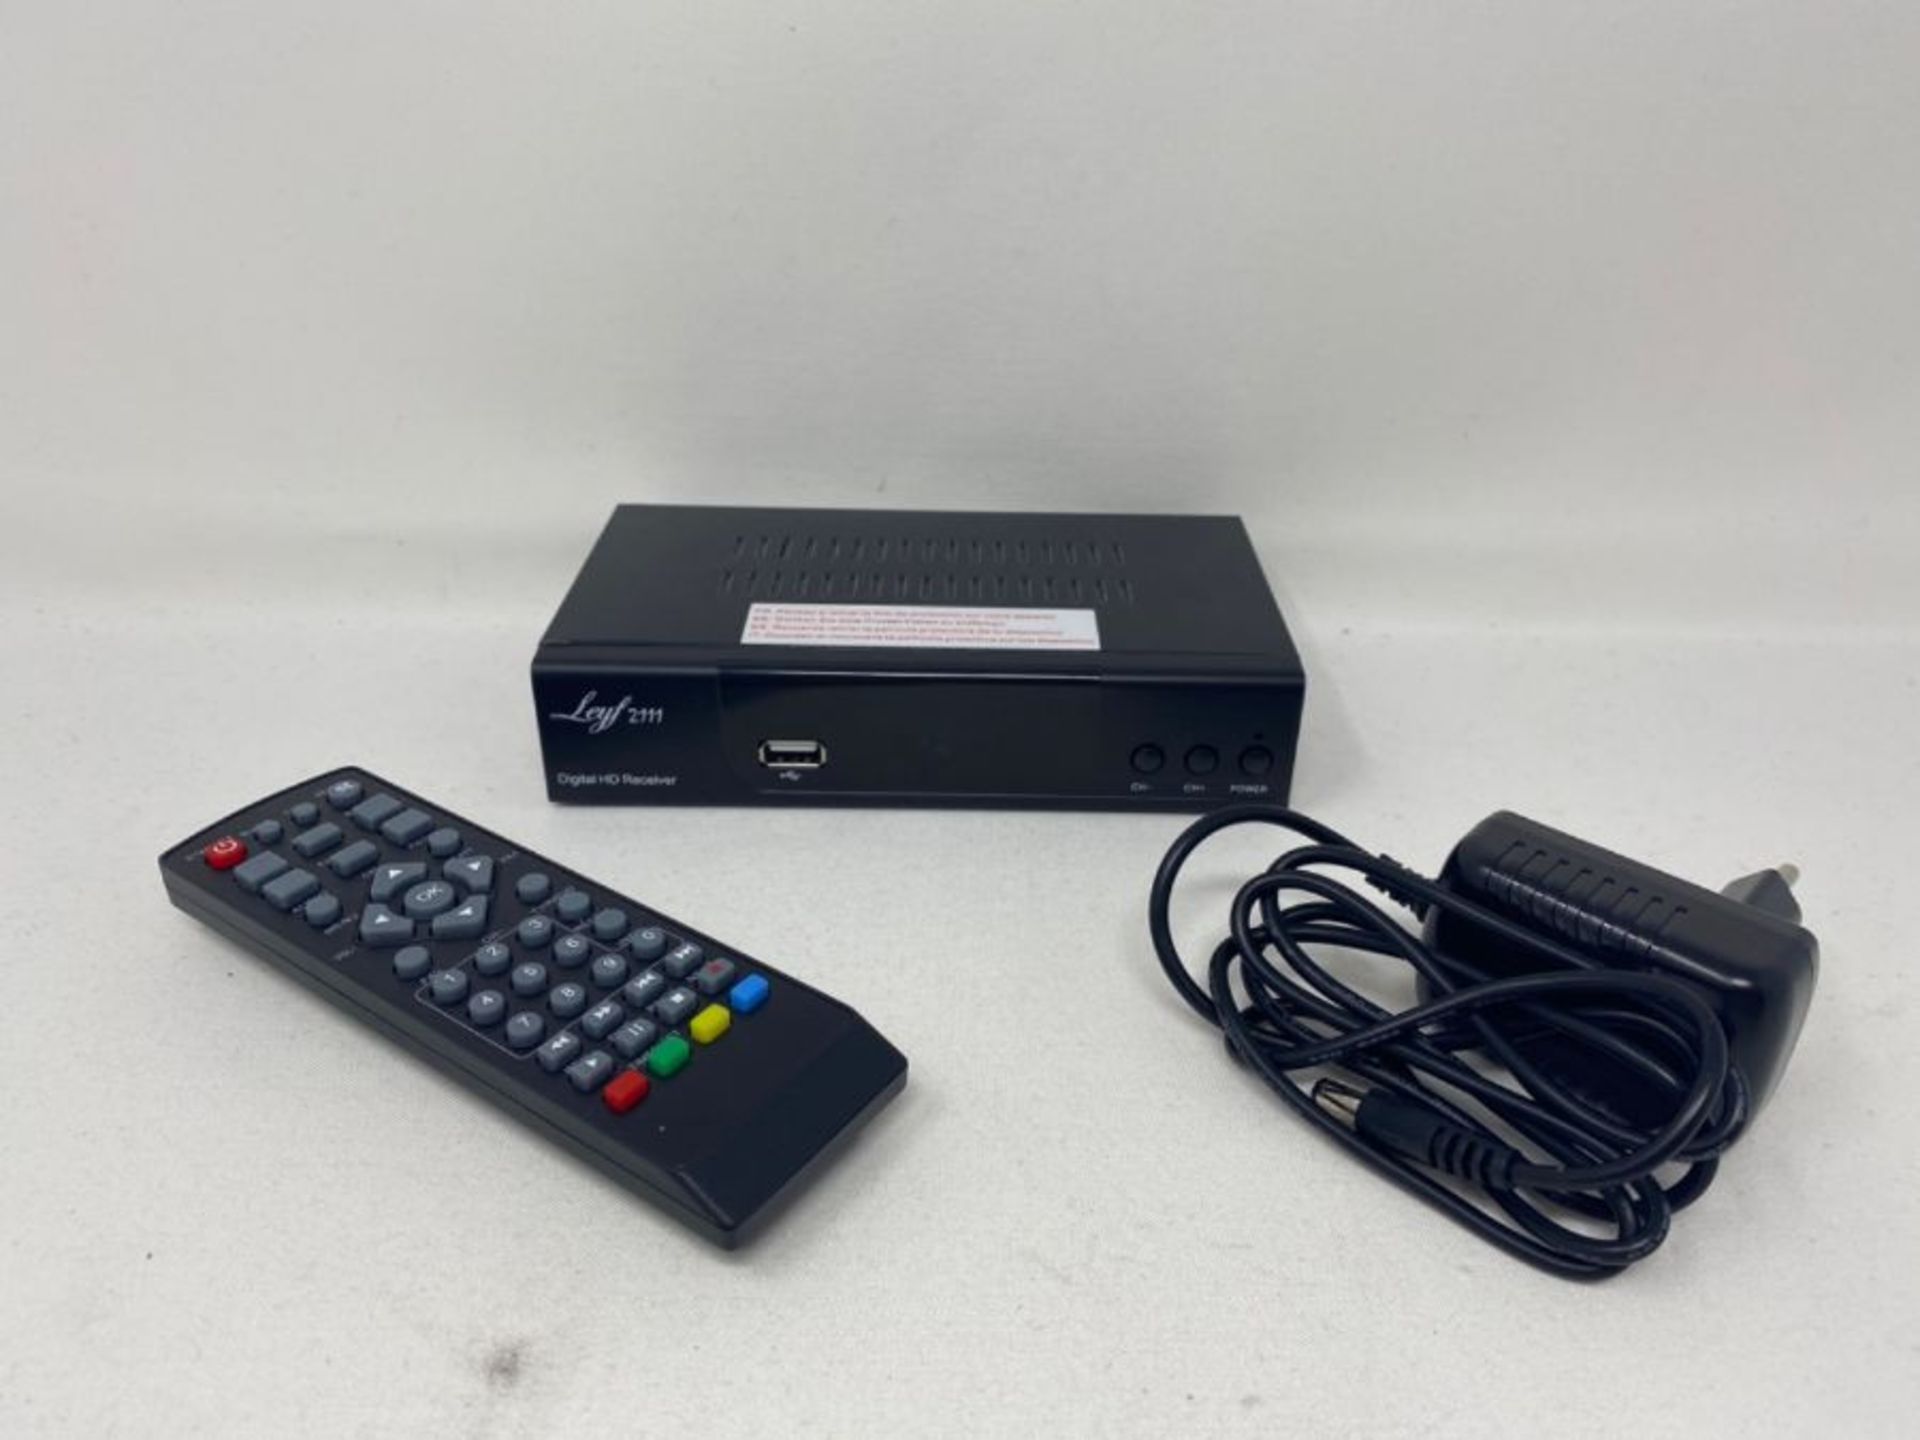 hd-line LEYF2111C Cable Receiver for Digital Cable TV - DVB-C (HDTV, DVB-C / C2, DVB-T - Image 3 of 3